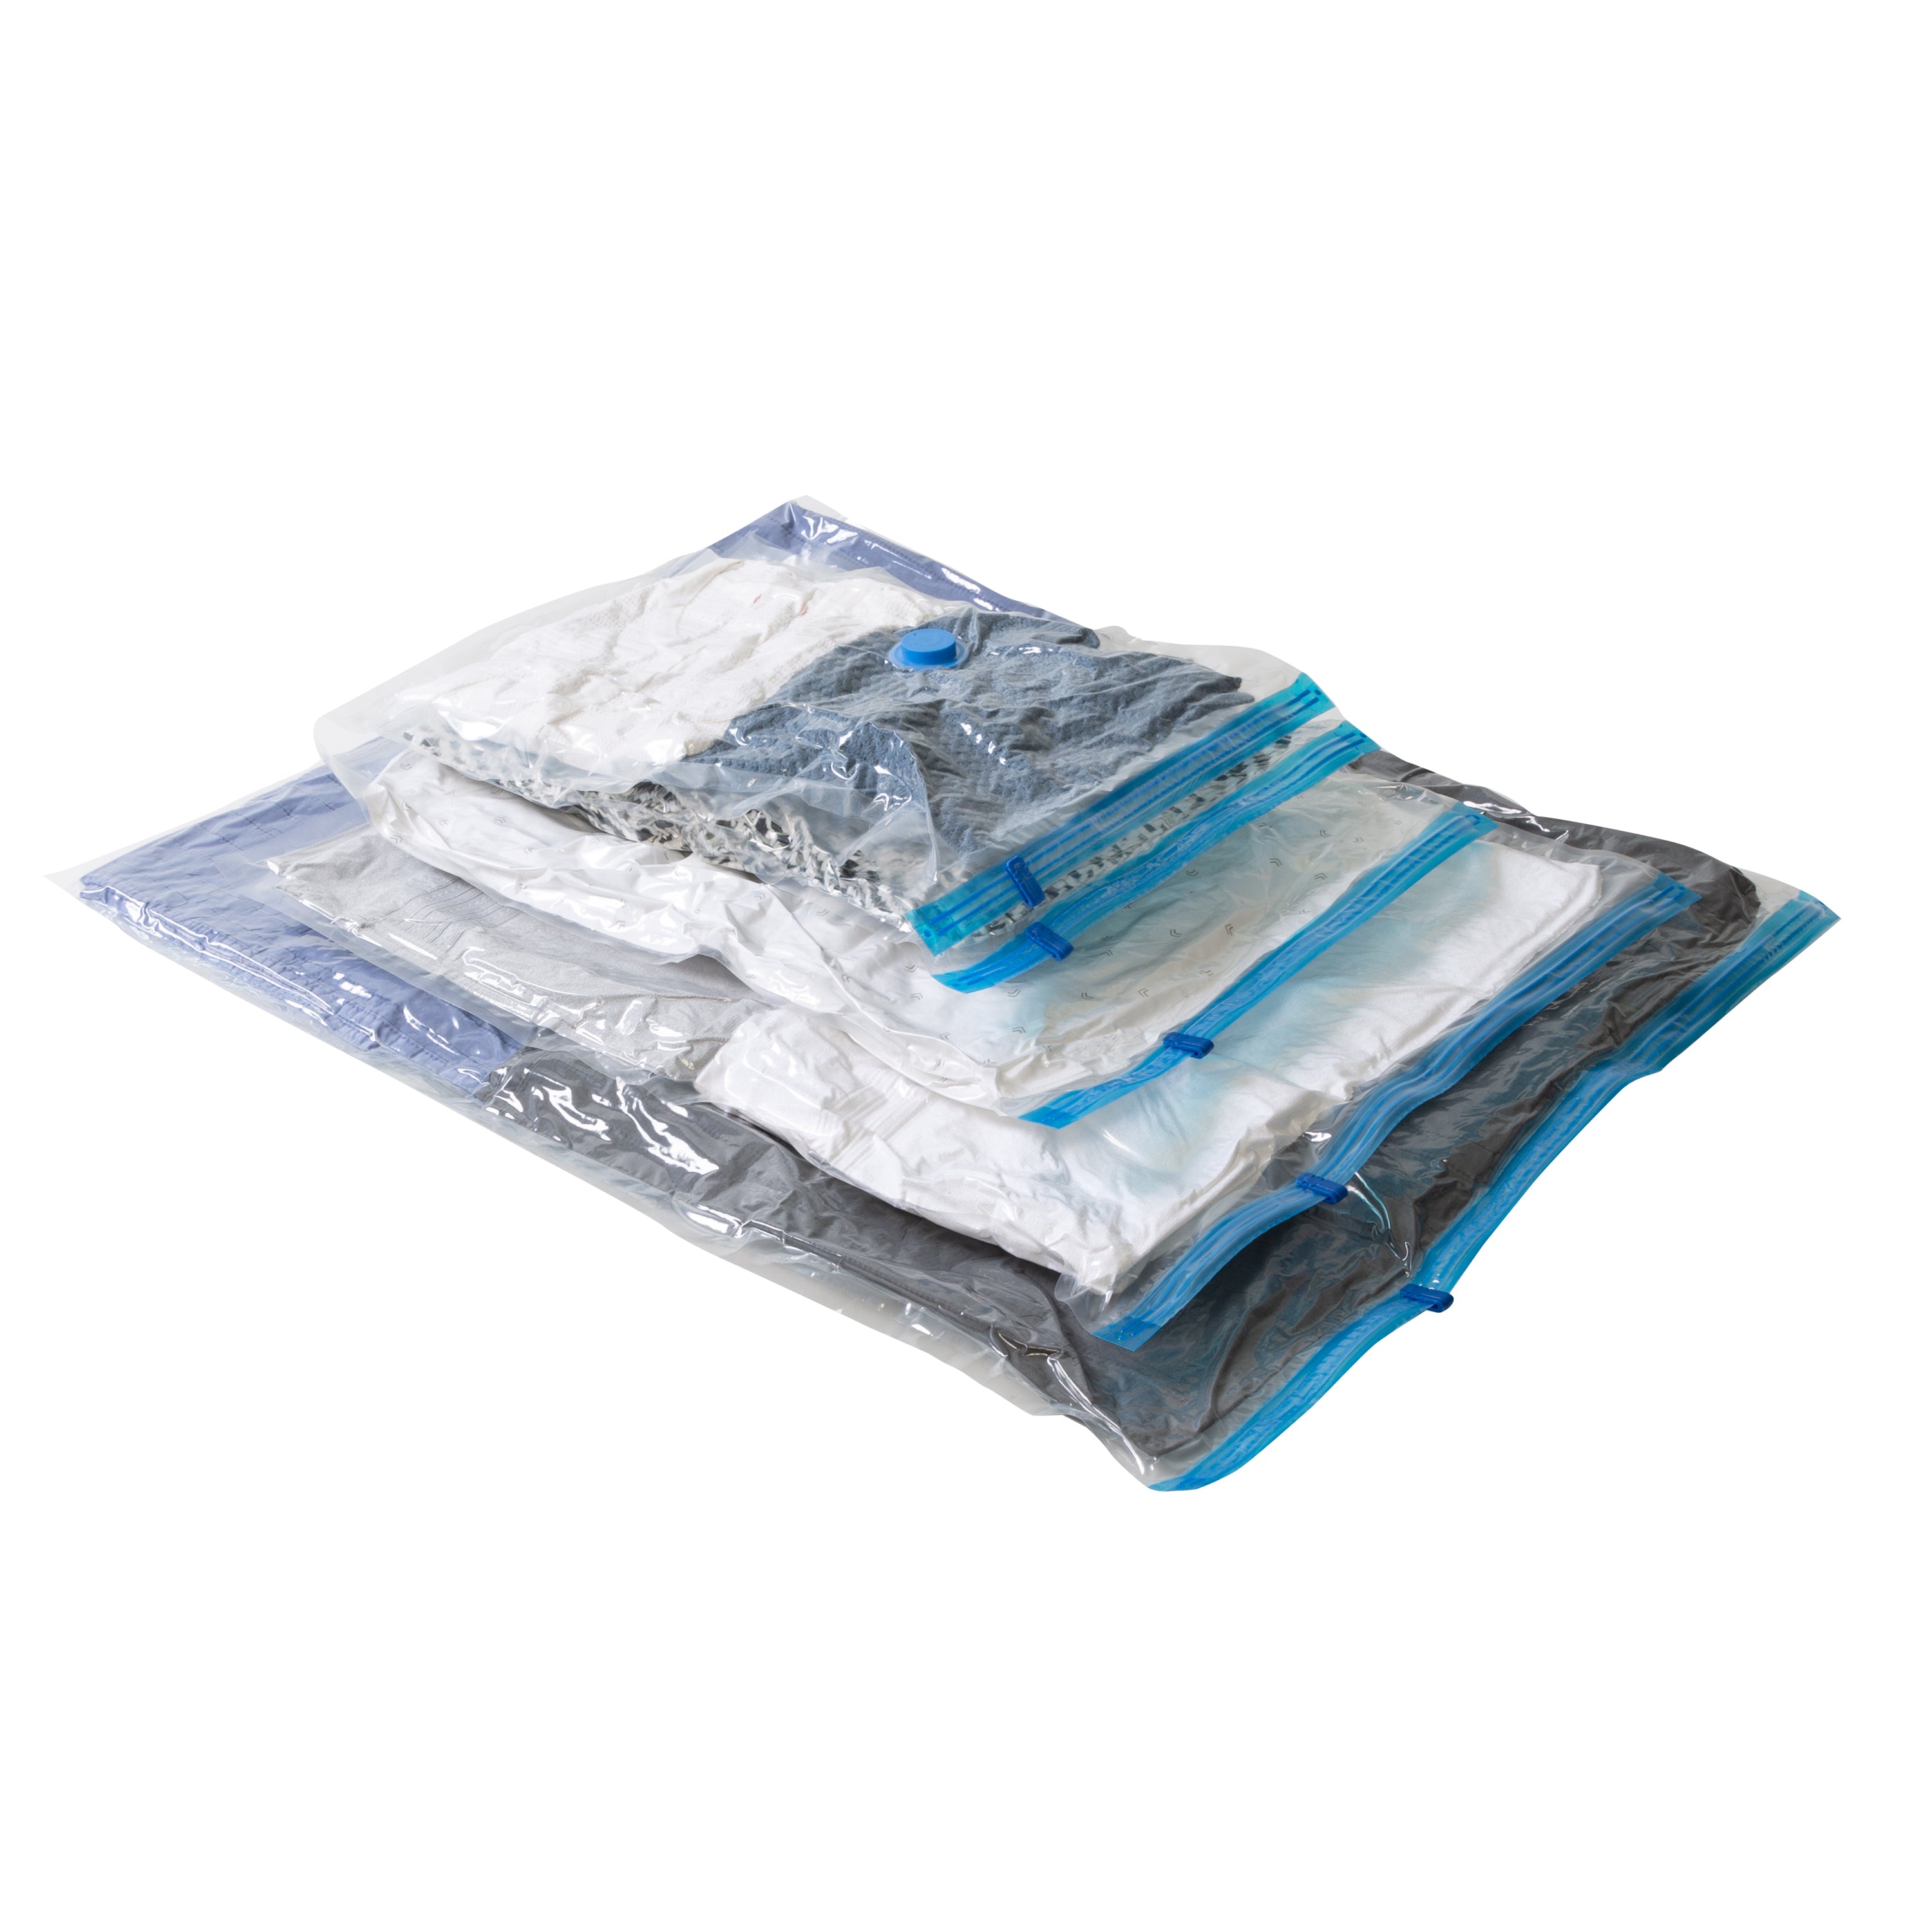 These Traveler-loved Vacuum Seal Bags Are 54% Off